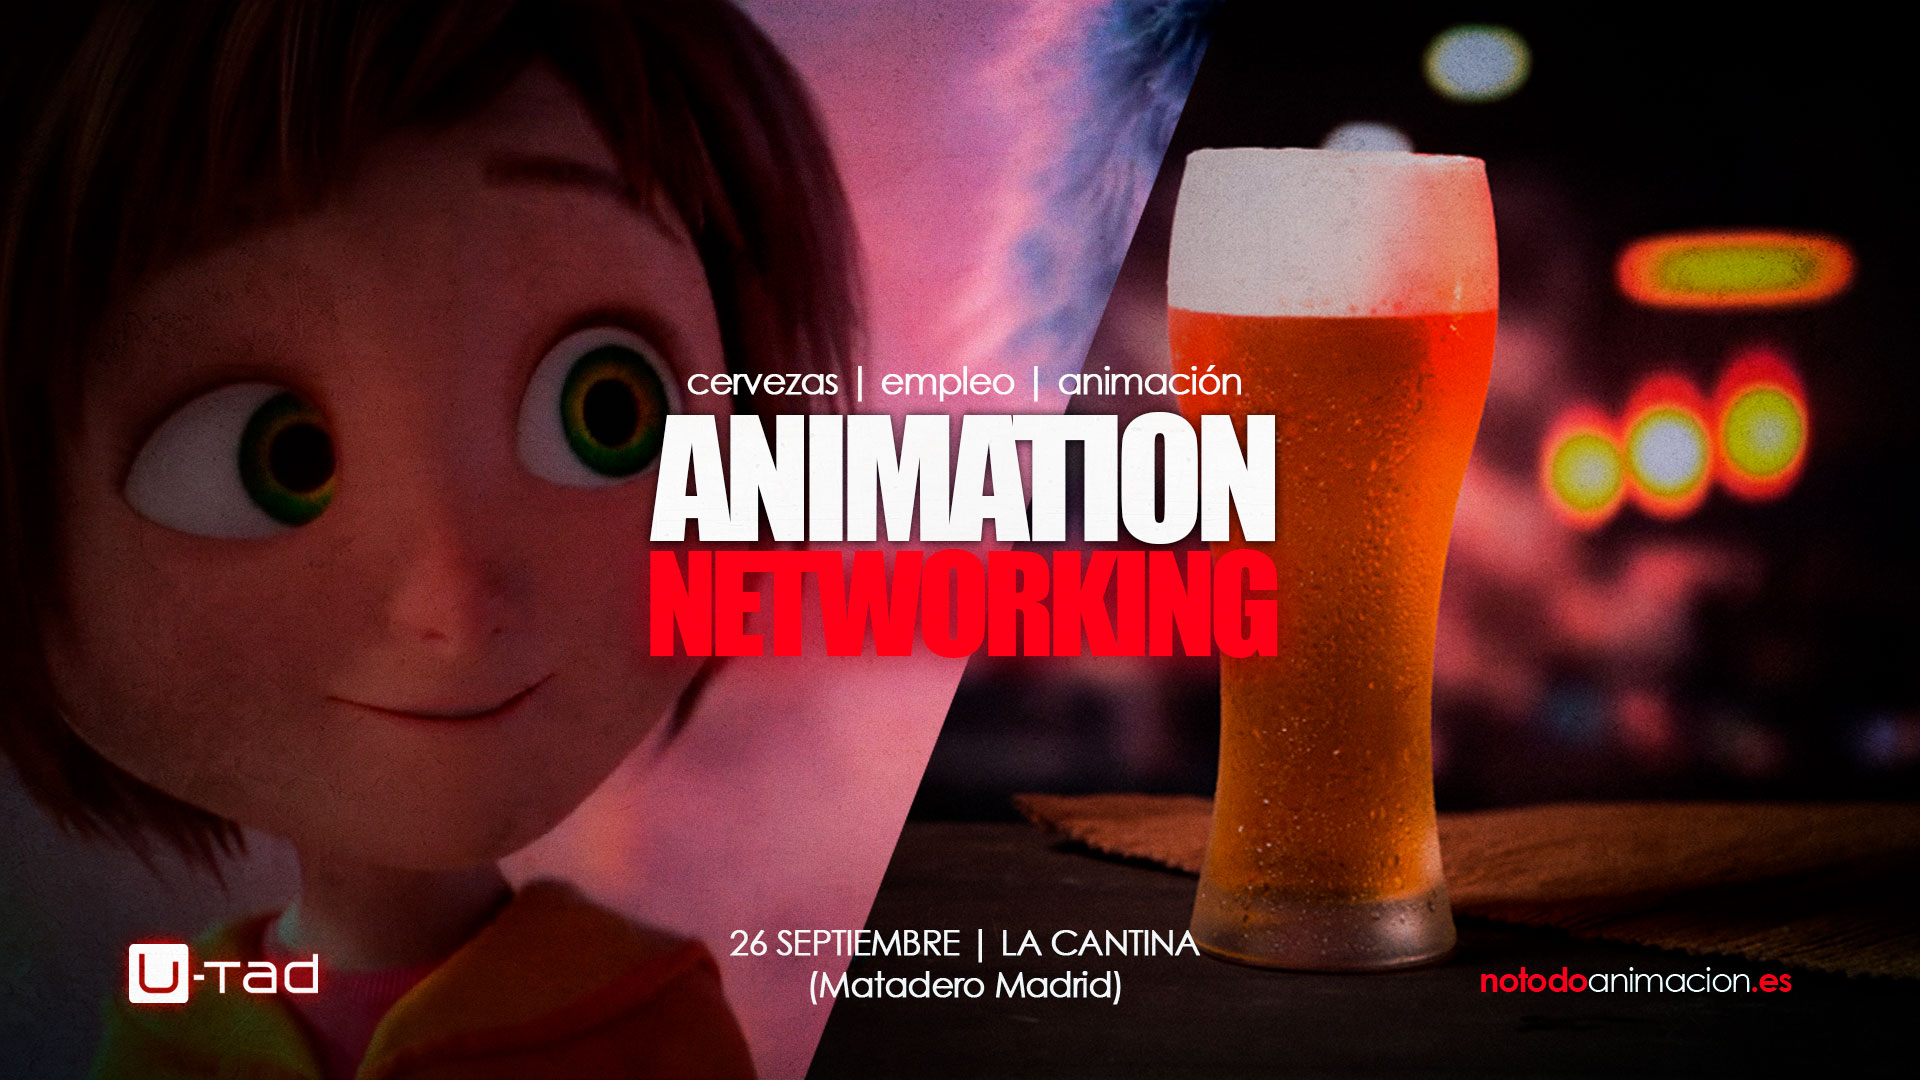 animation networking